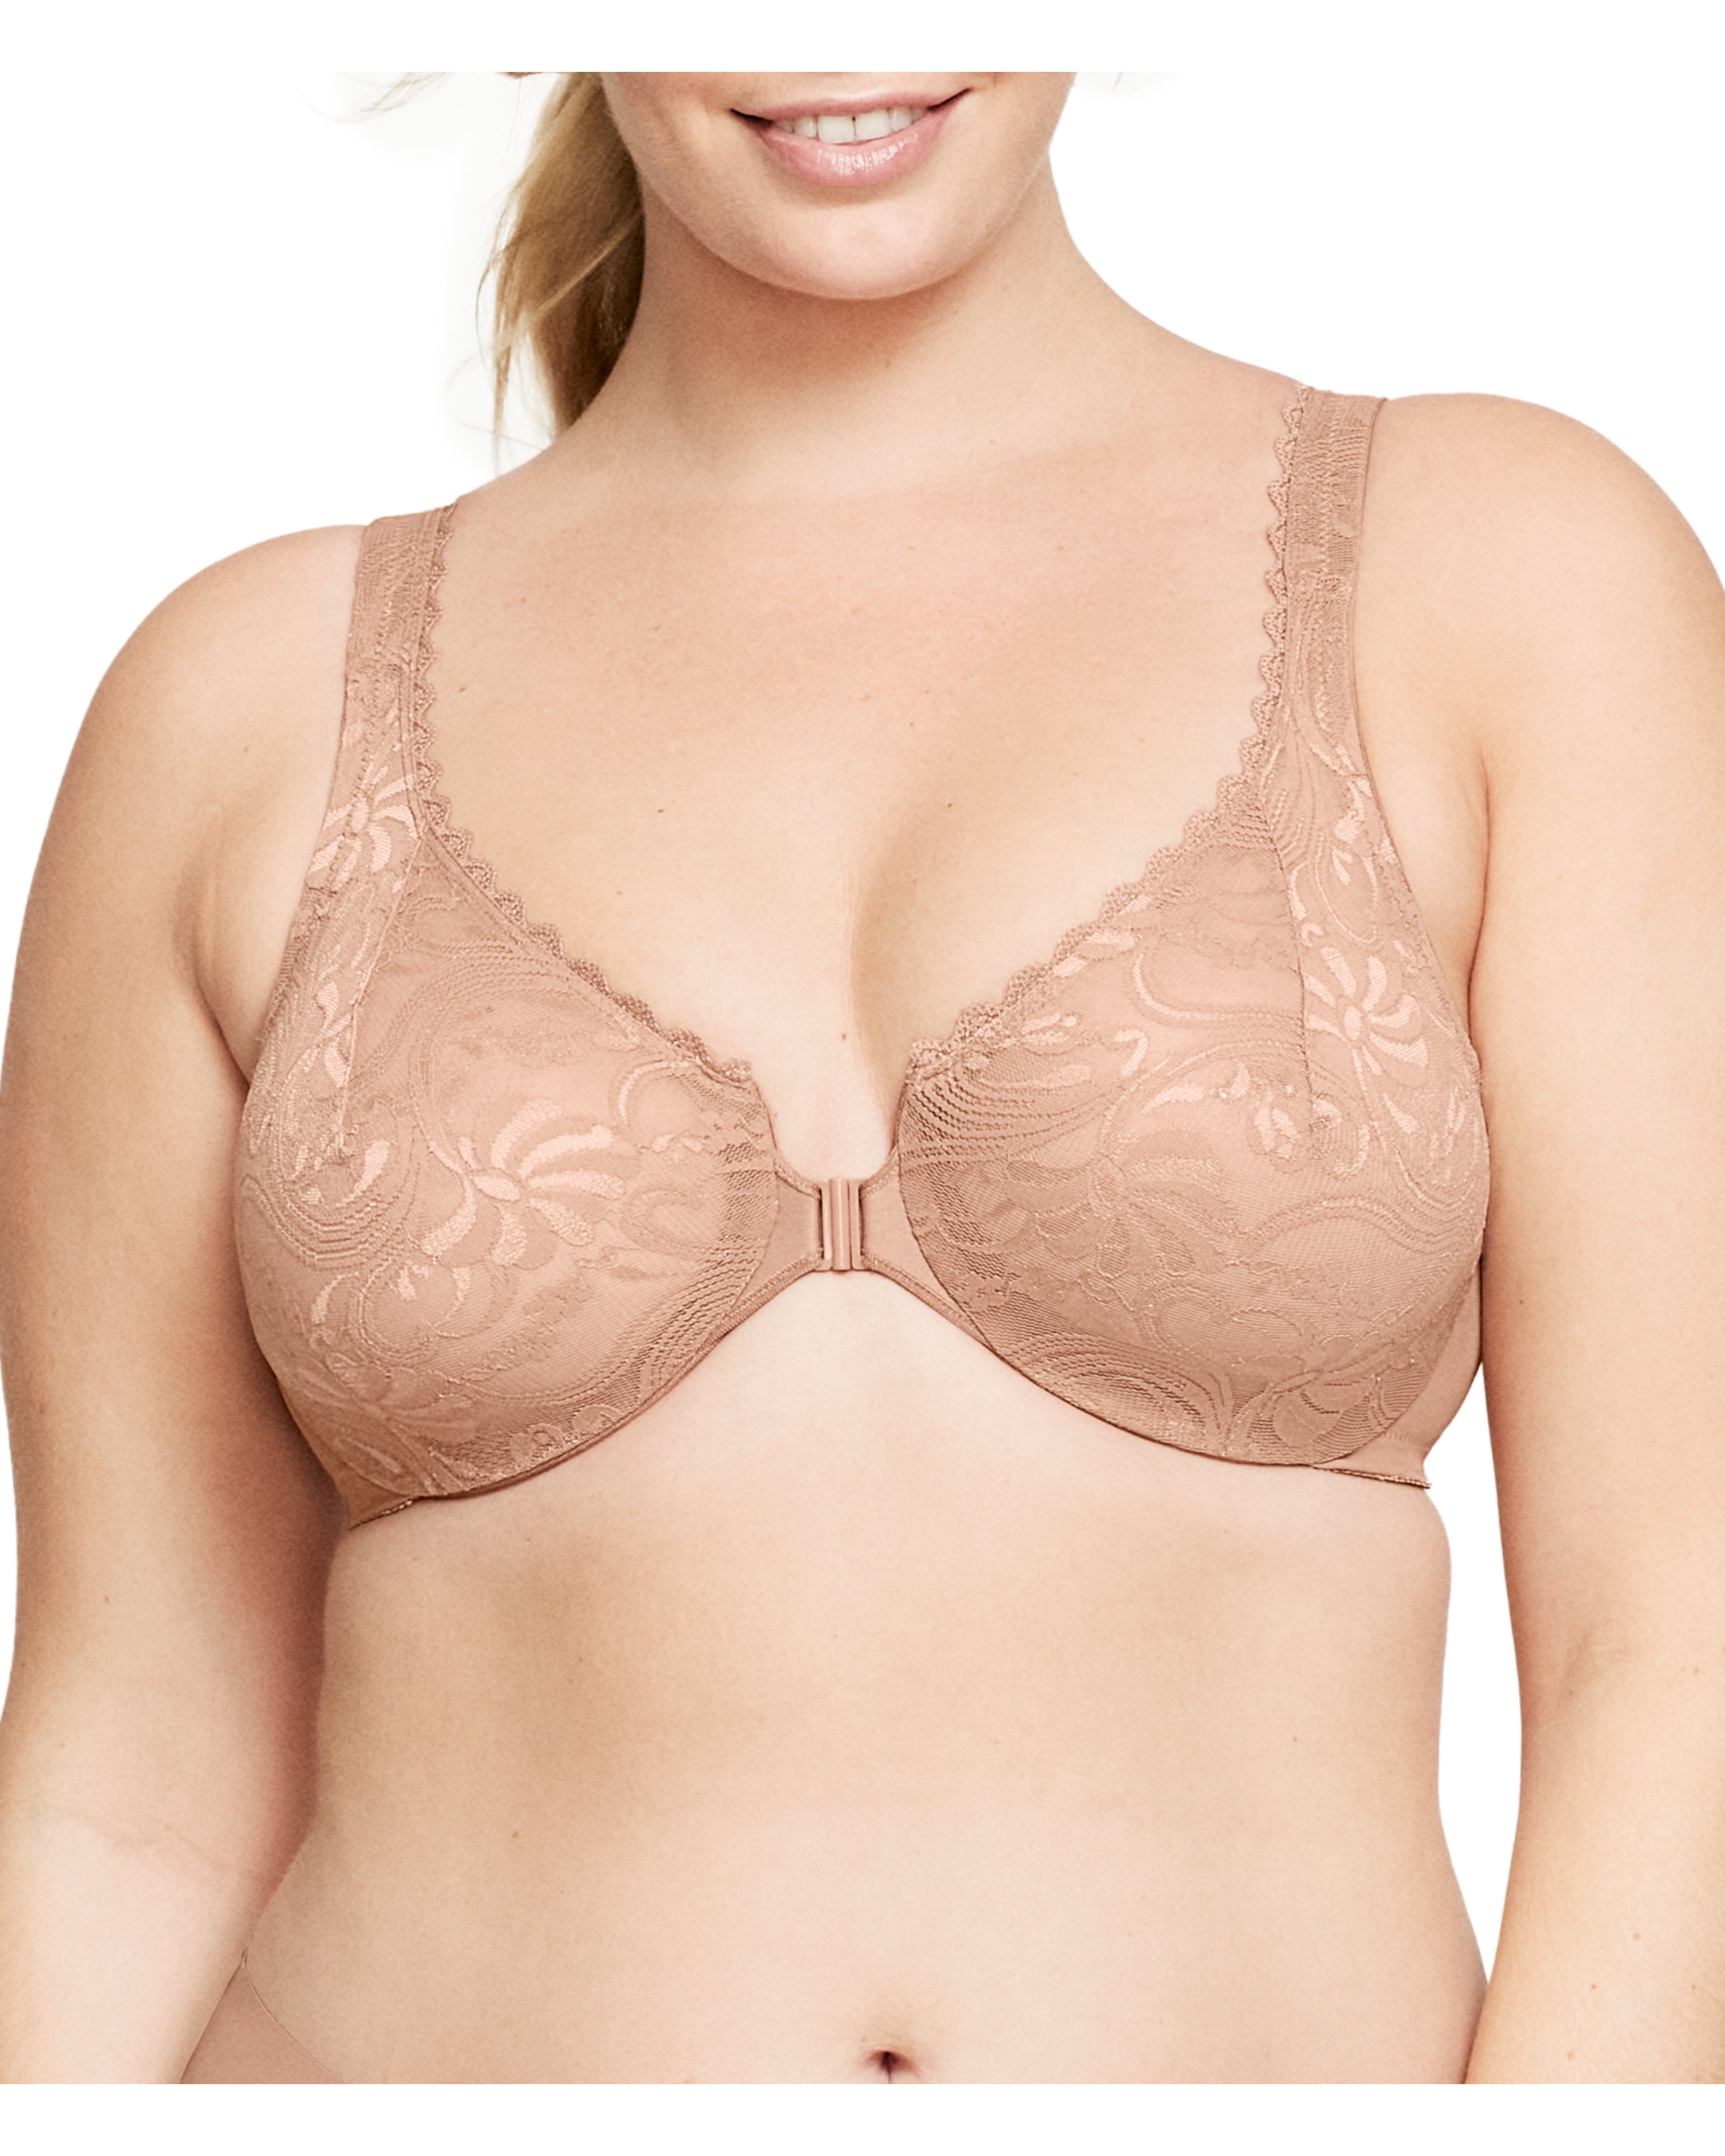 Glamorise, Intimates & Sleepwear, Wonderwire Frontclosure Stretch Lace  Bra Size 46g In The Color Apricot